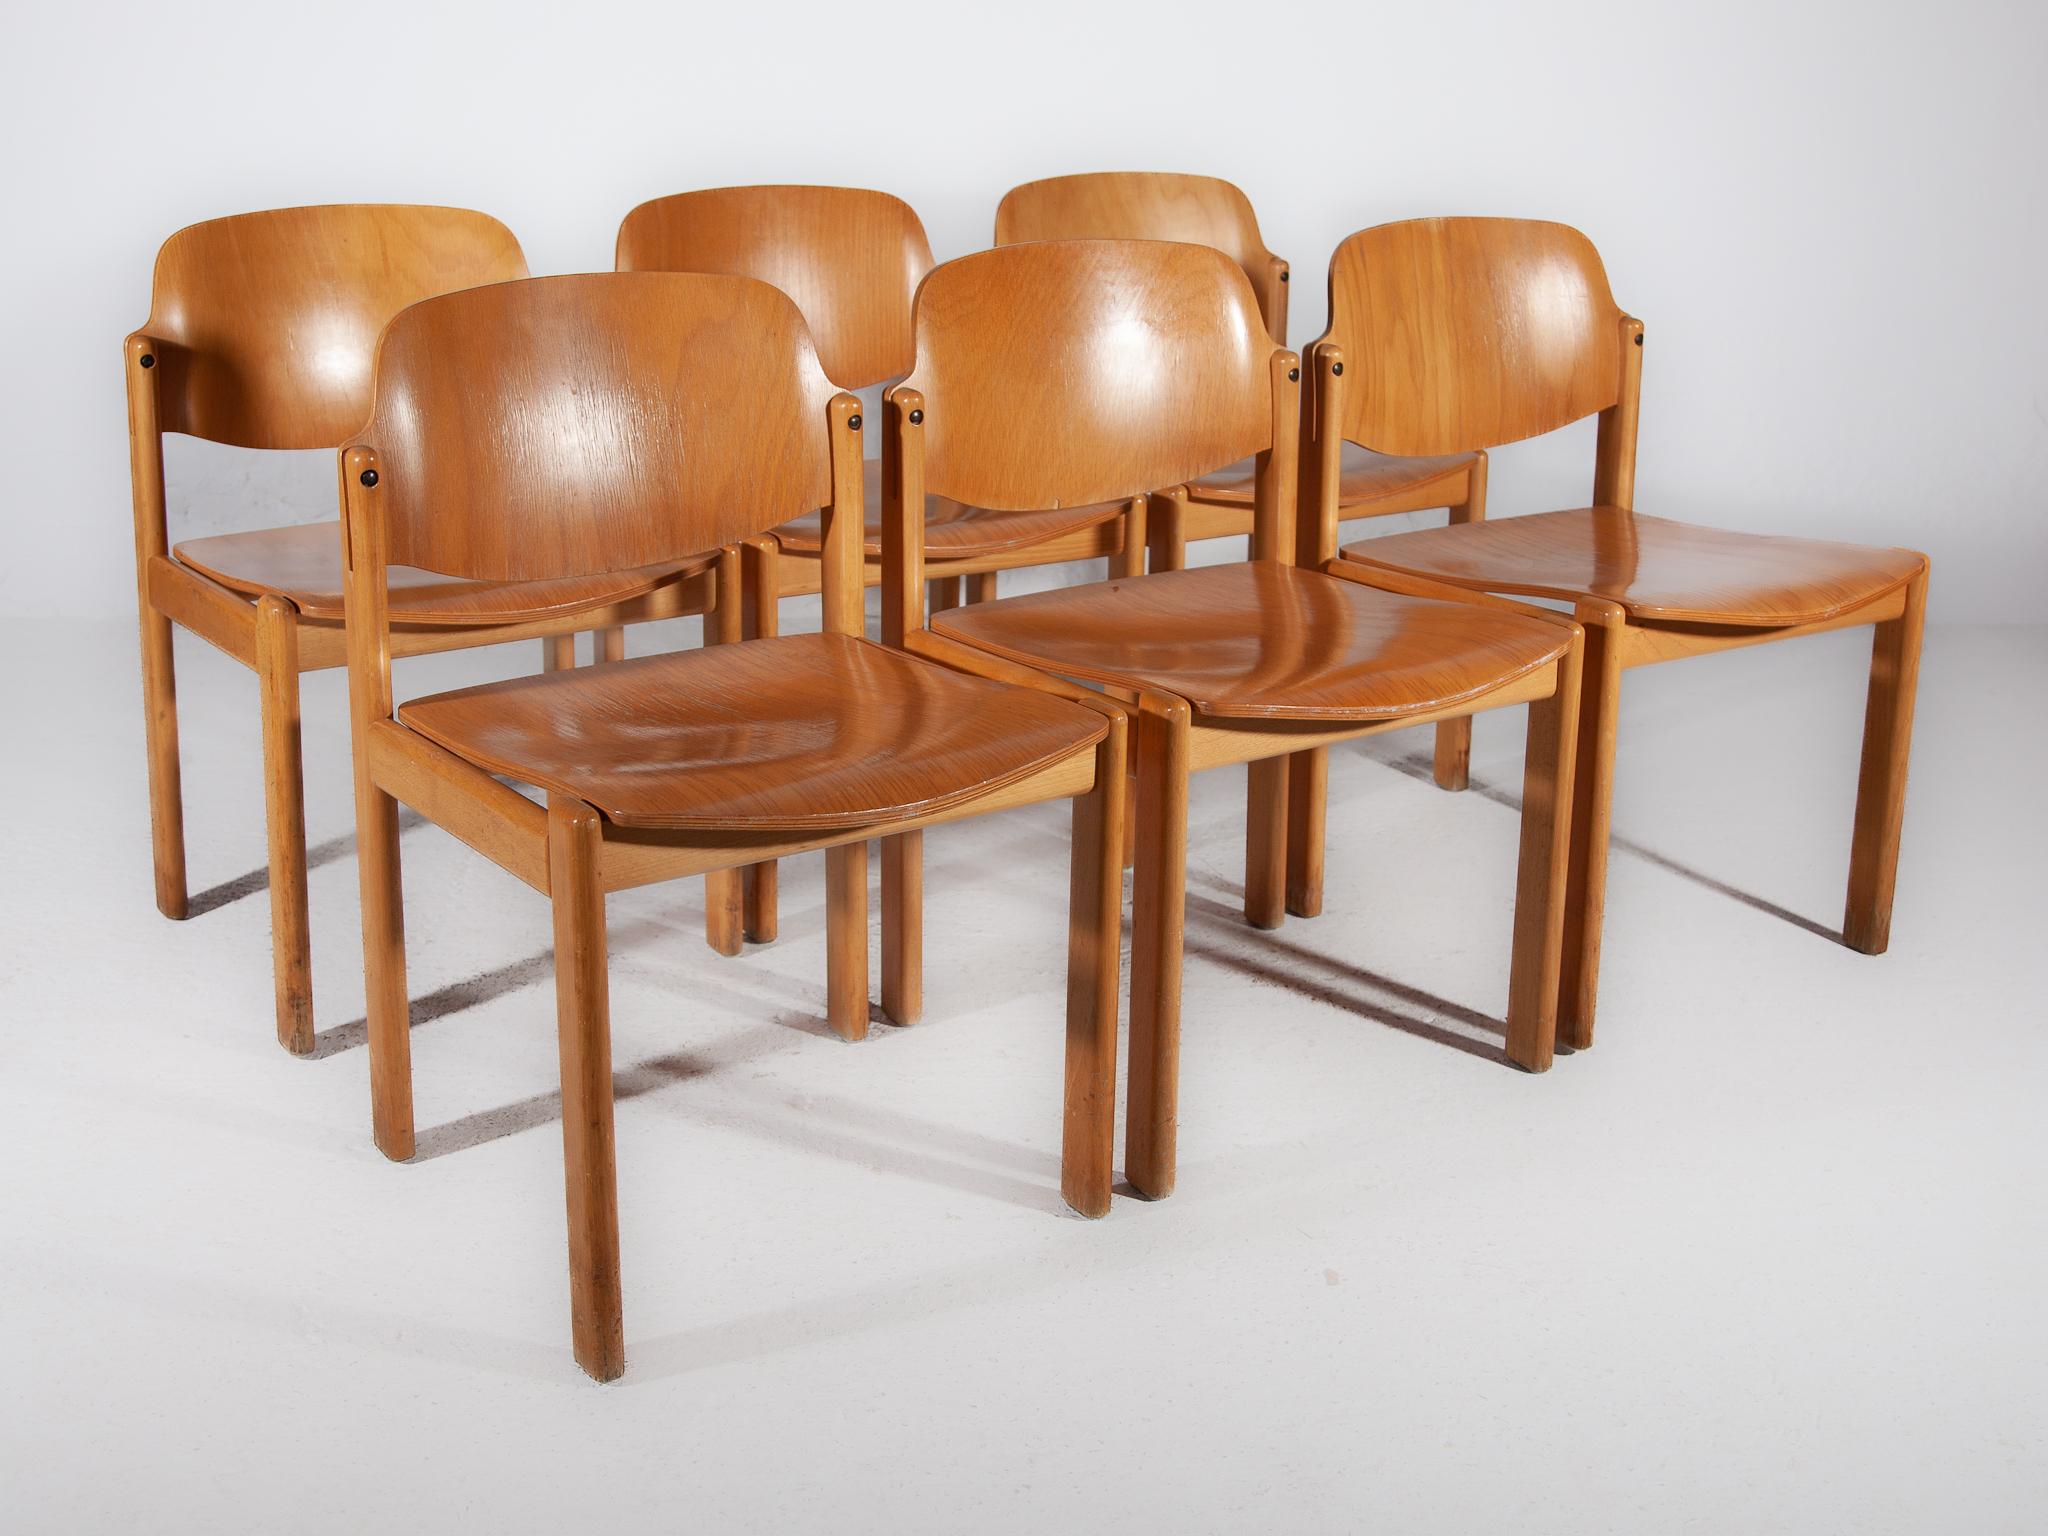 Set of Twelve Beech Wood Dining Chairs, Germany 1970s For Sale 6